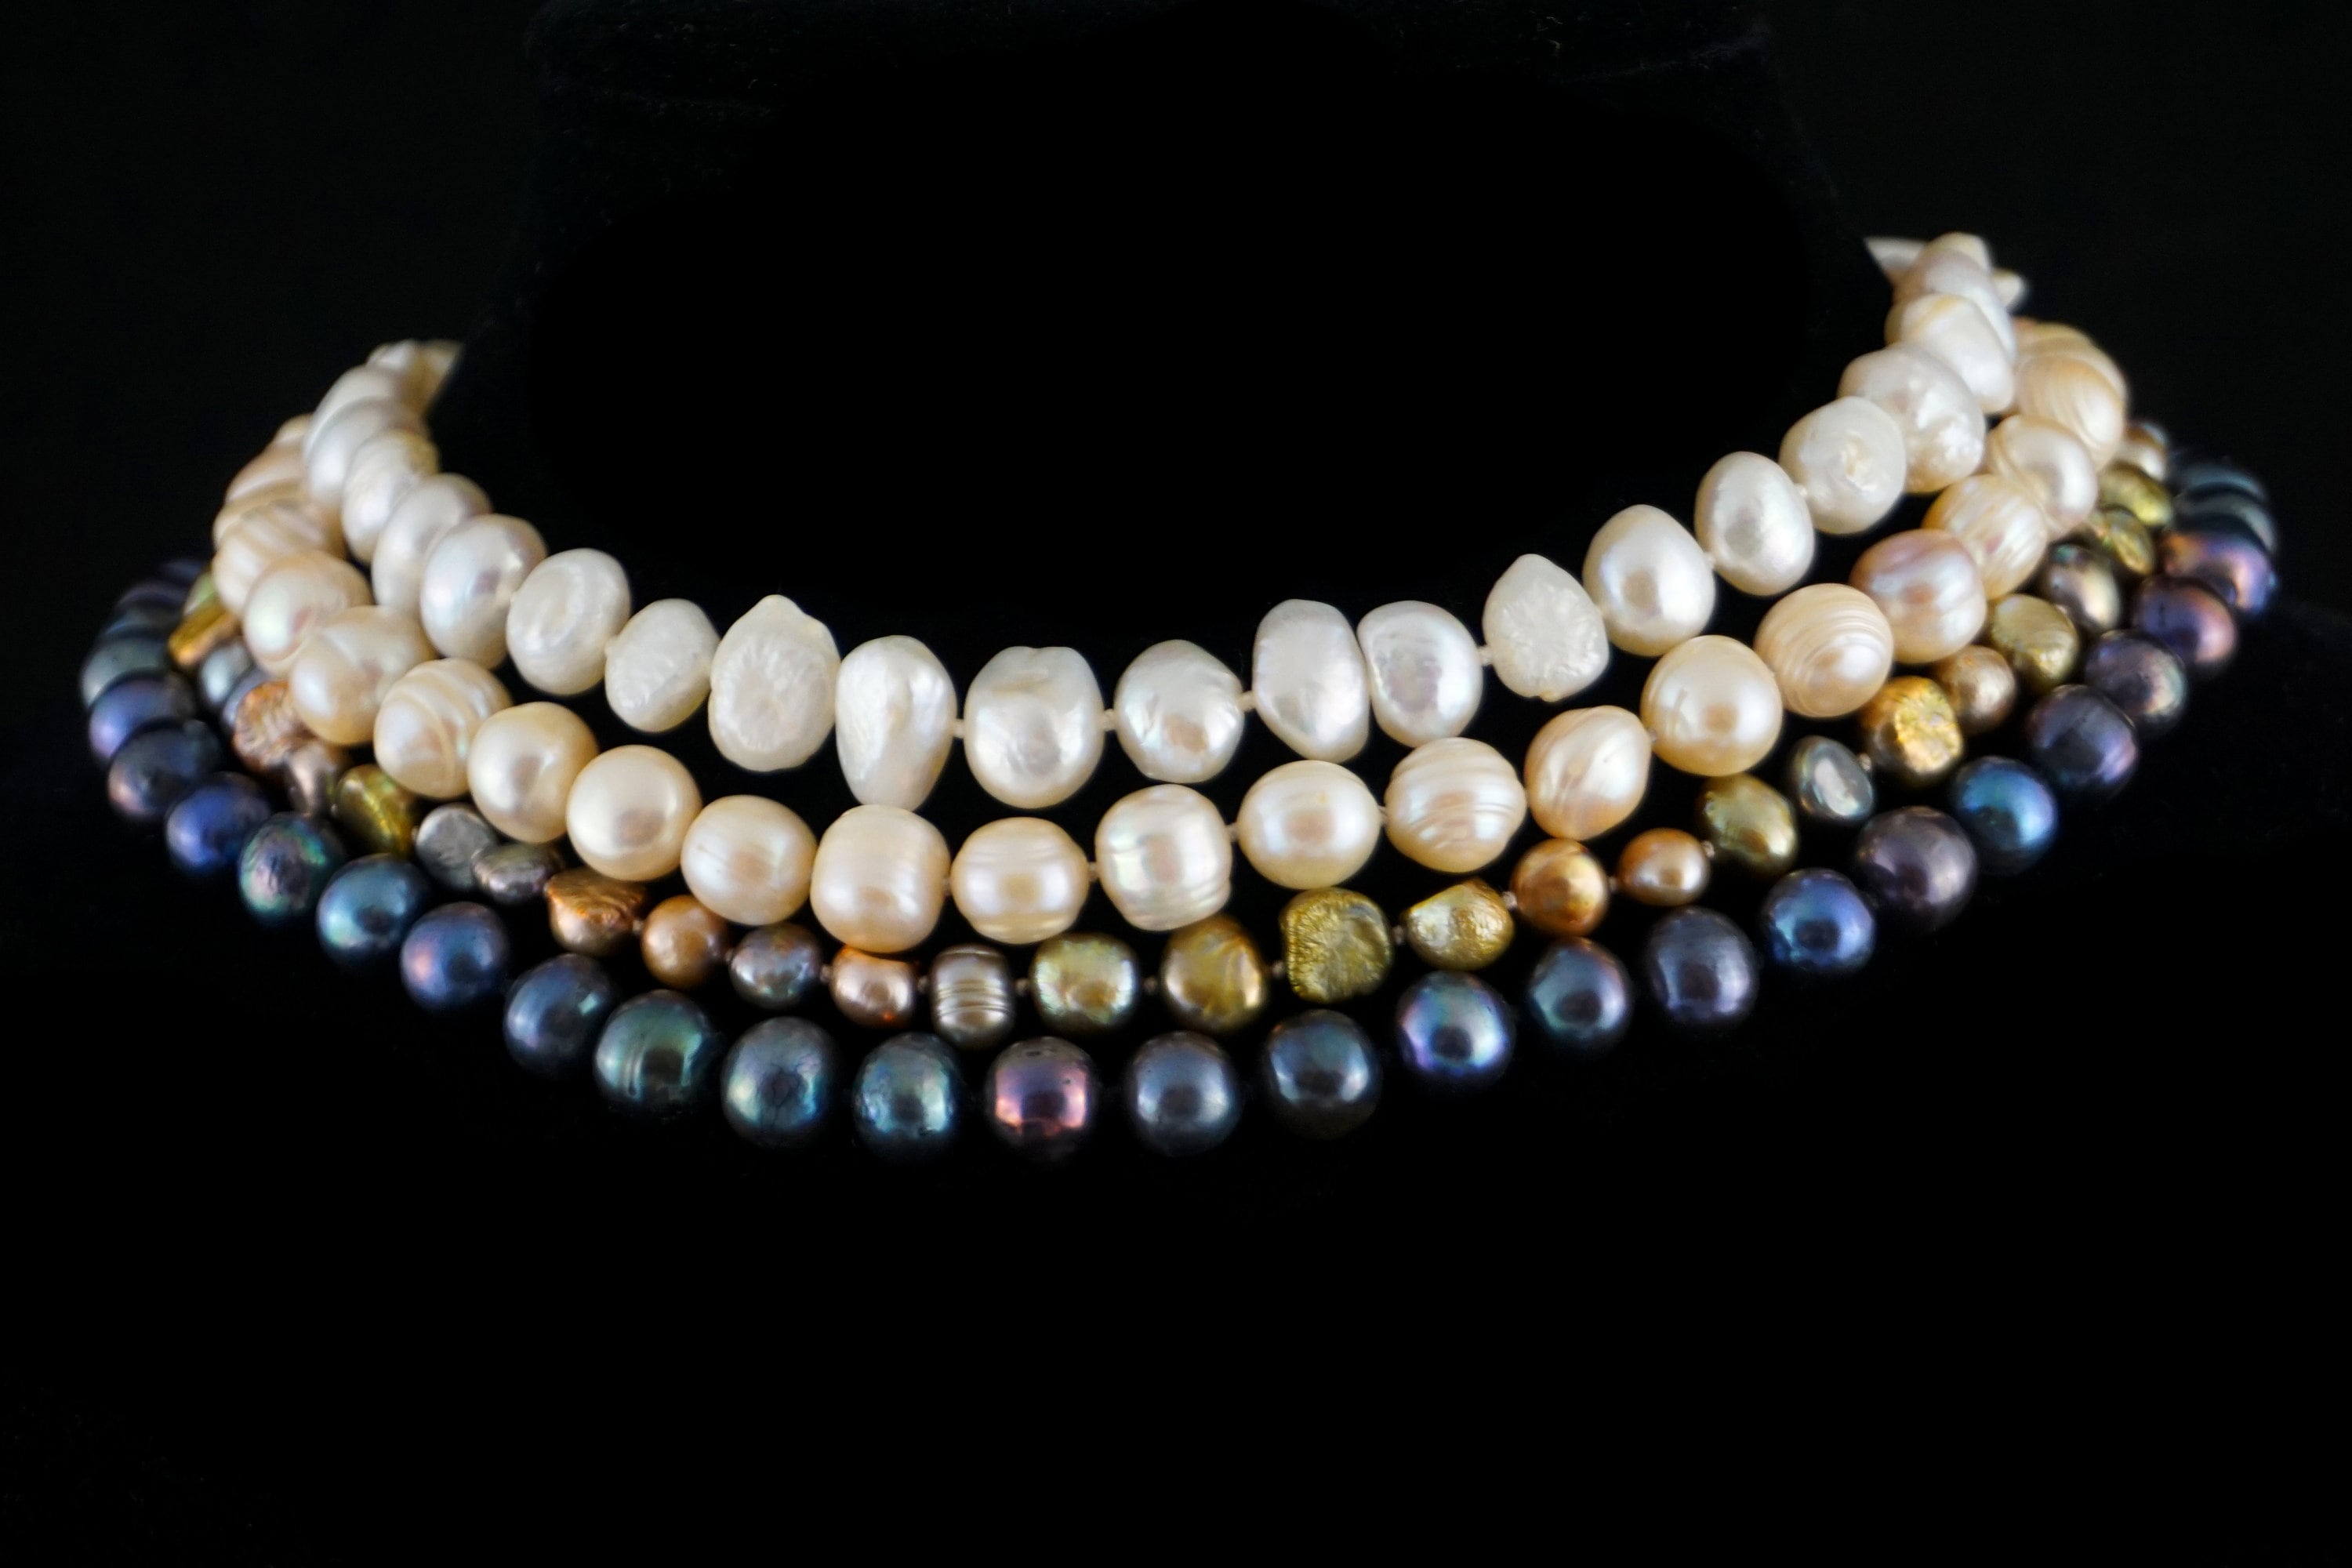 Meant-to-be-worn Pearl Necklace Gift Boxed : Black Pearl White 